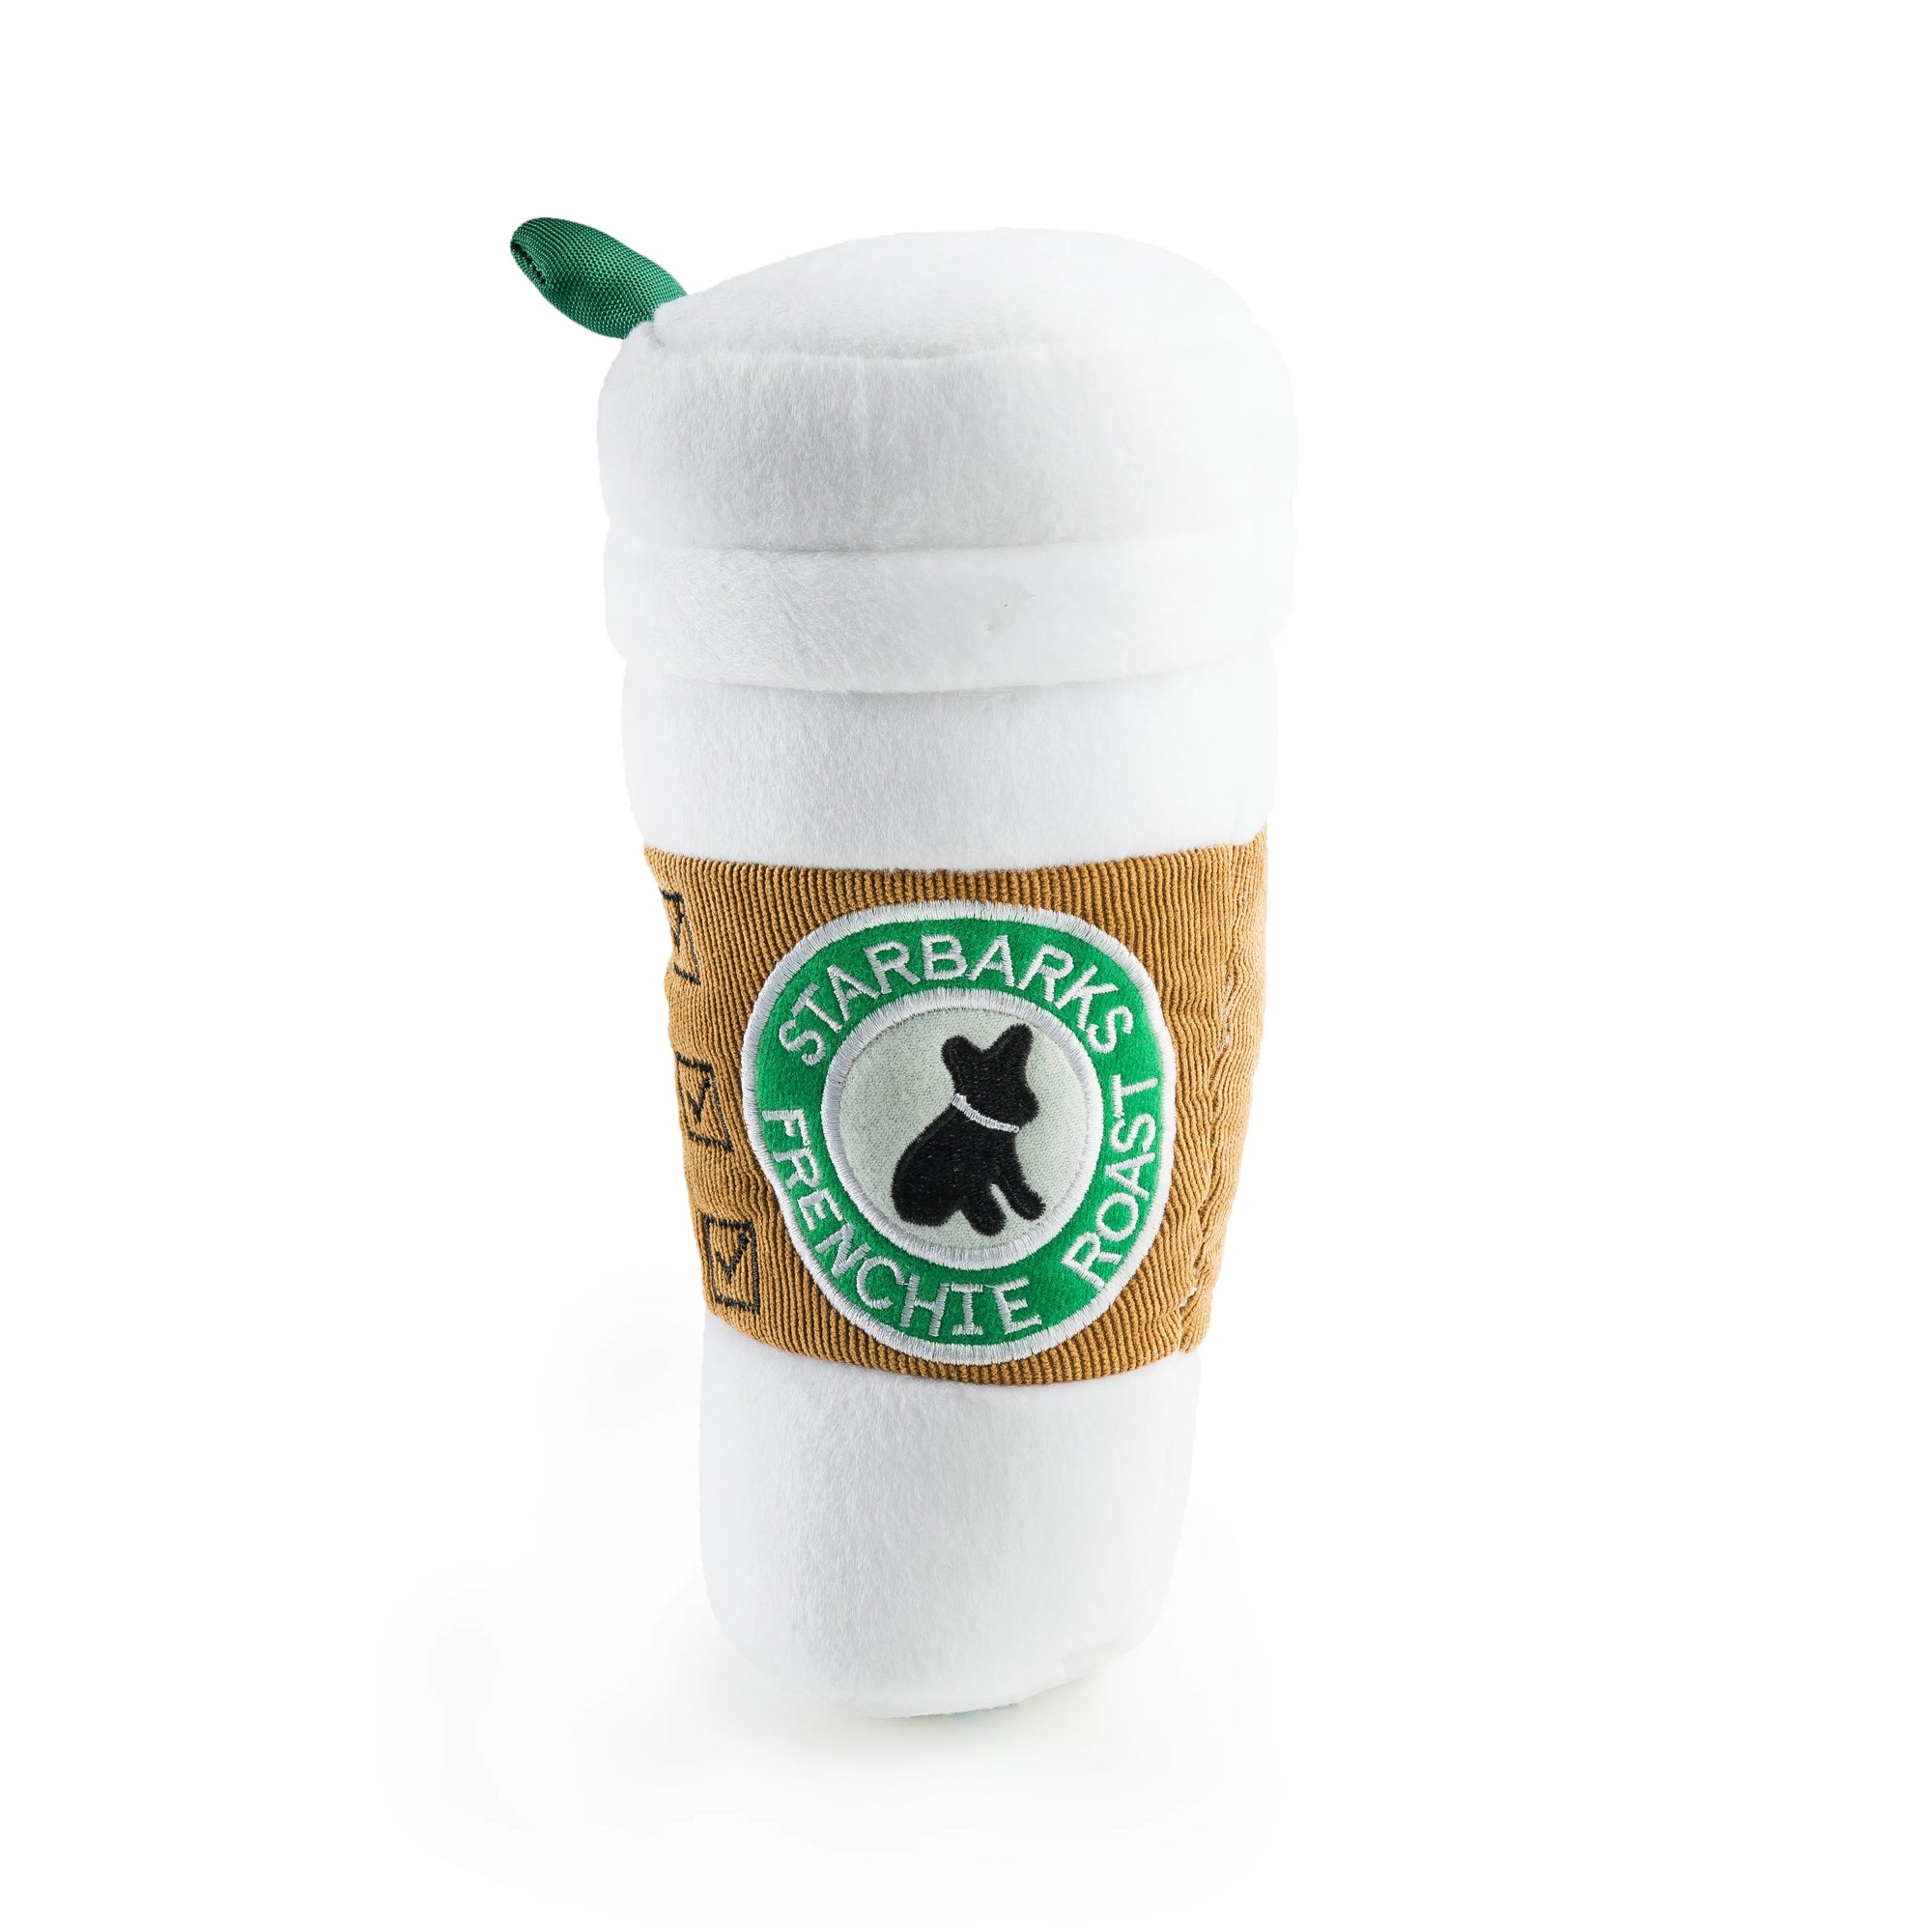 Starbarks Coffee Cup with Lid